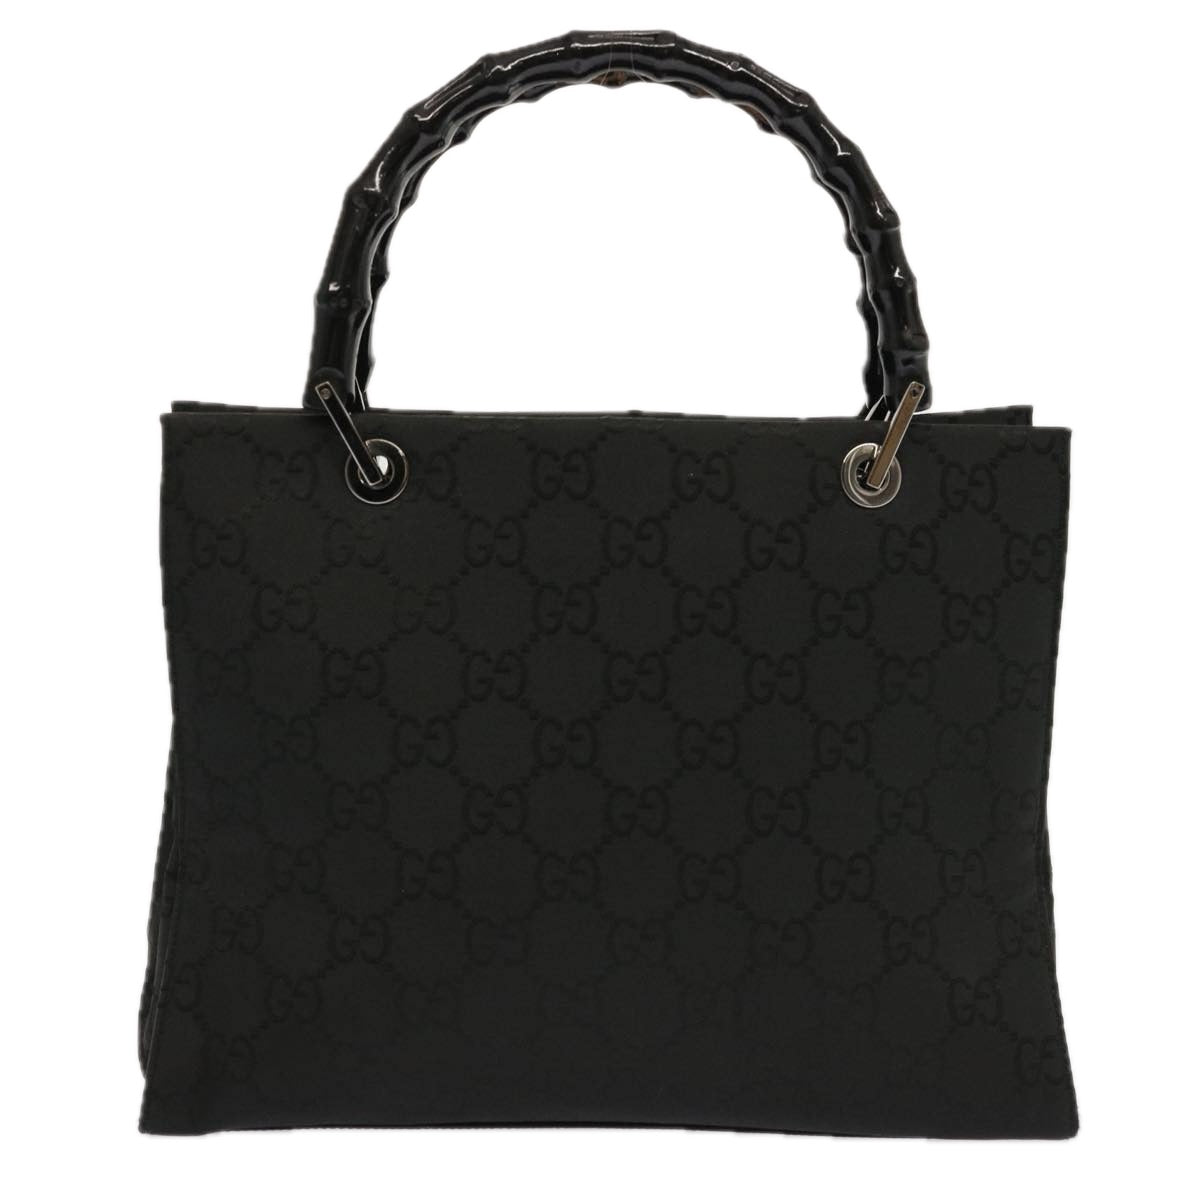 GUCCI Bamboo GG Canvas Hand Bag Black 002 1016 Auth yk11364 - 0